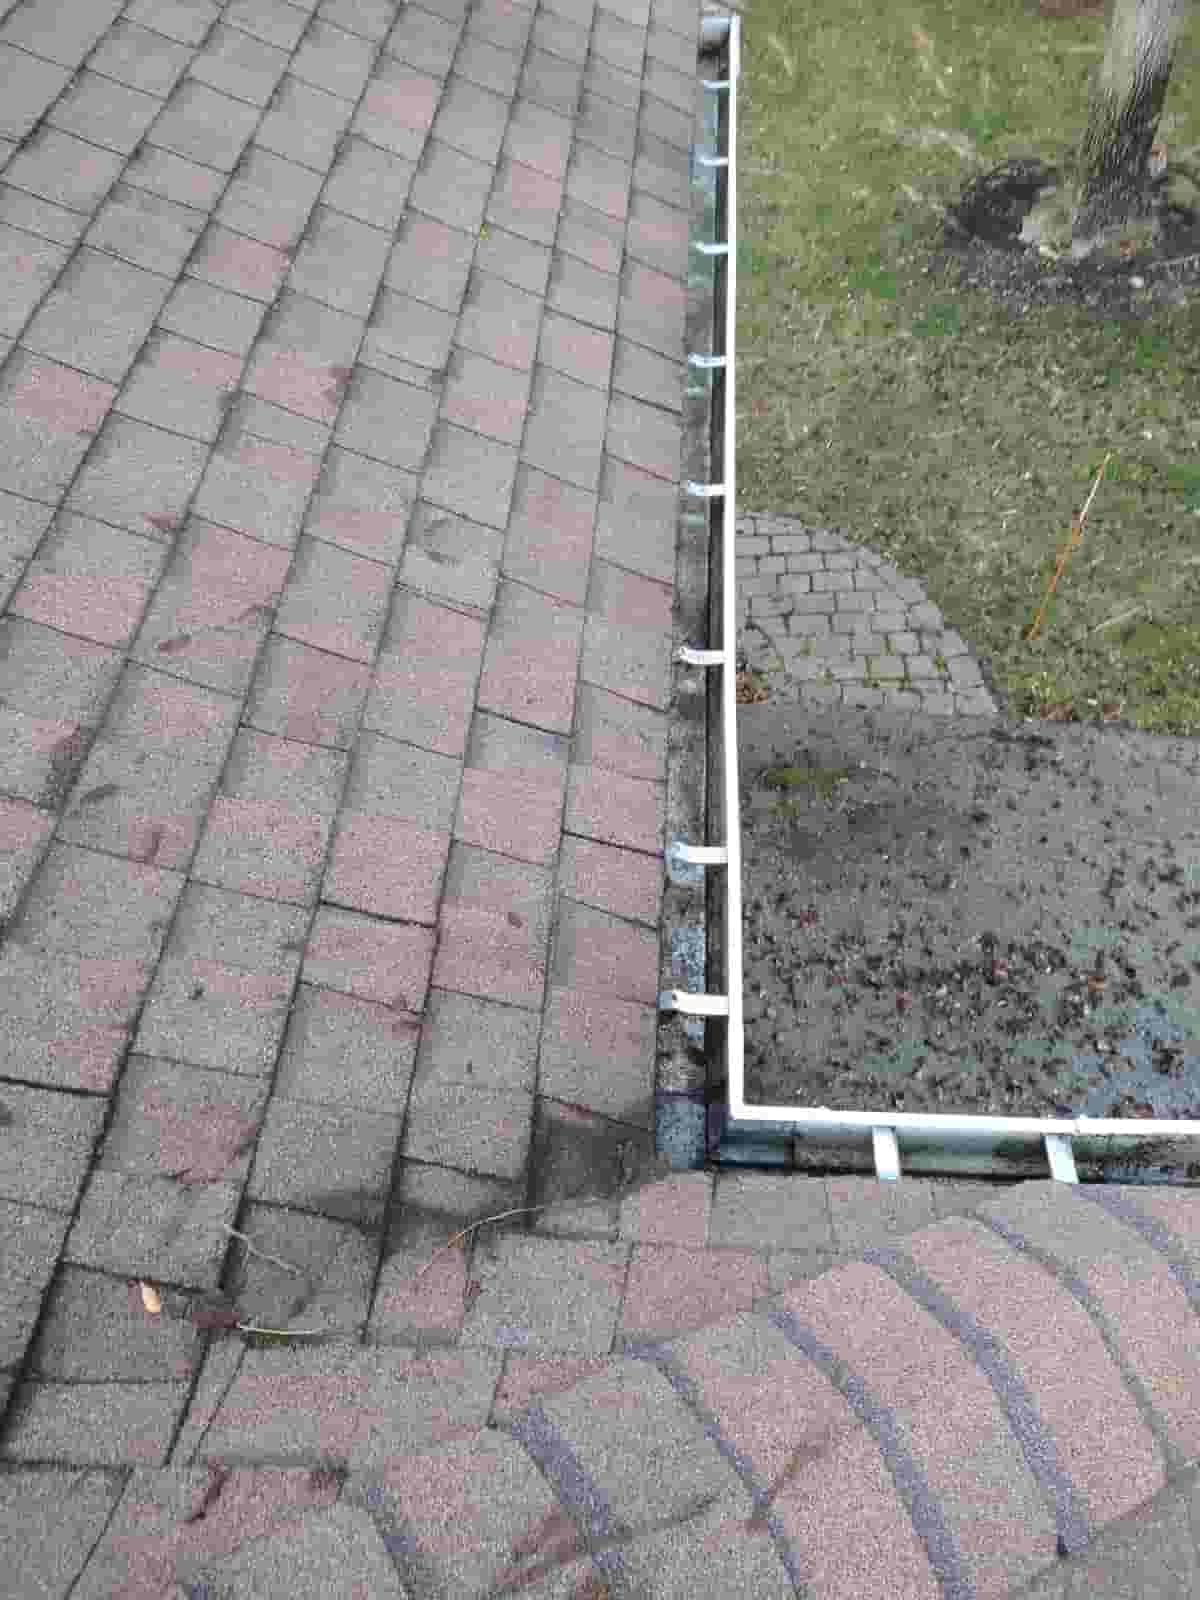 device for cleaning gutters